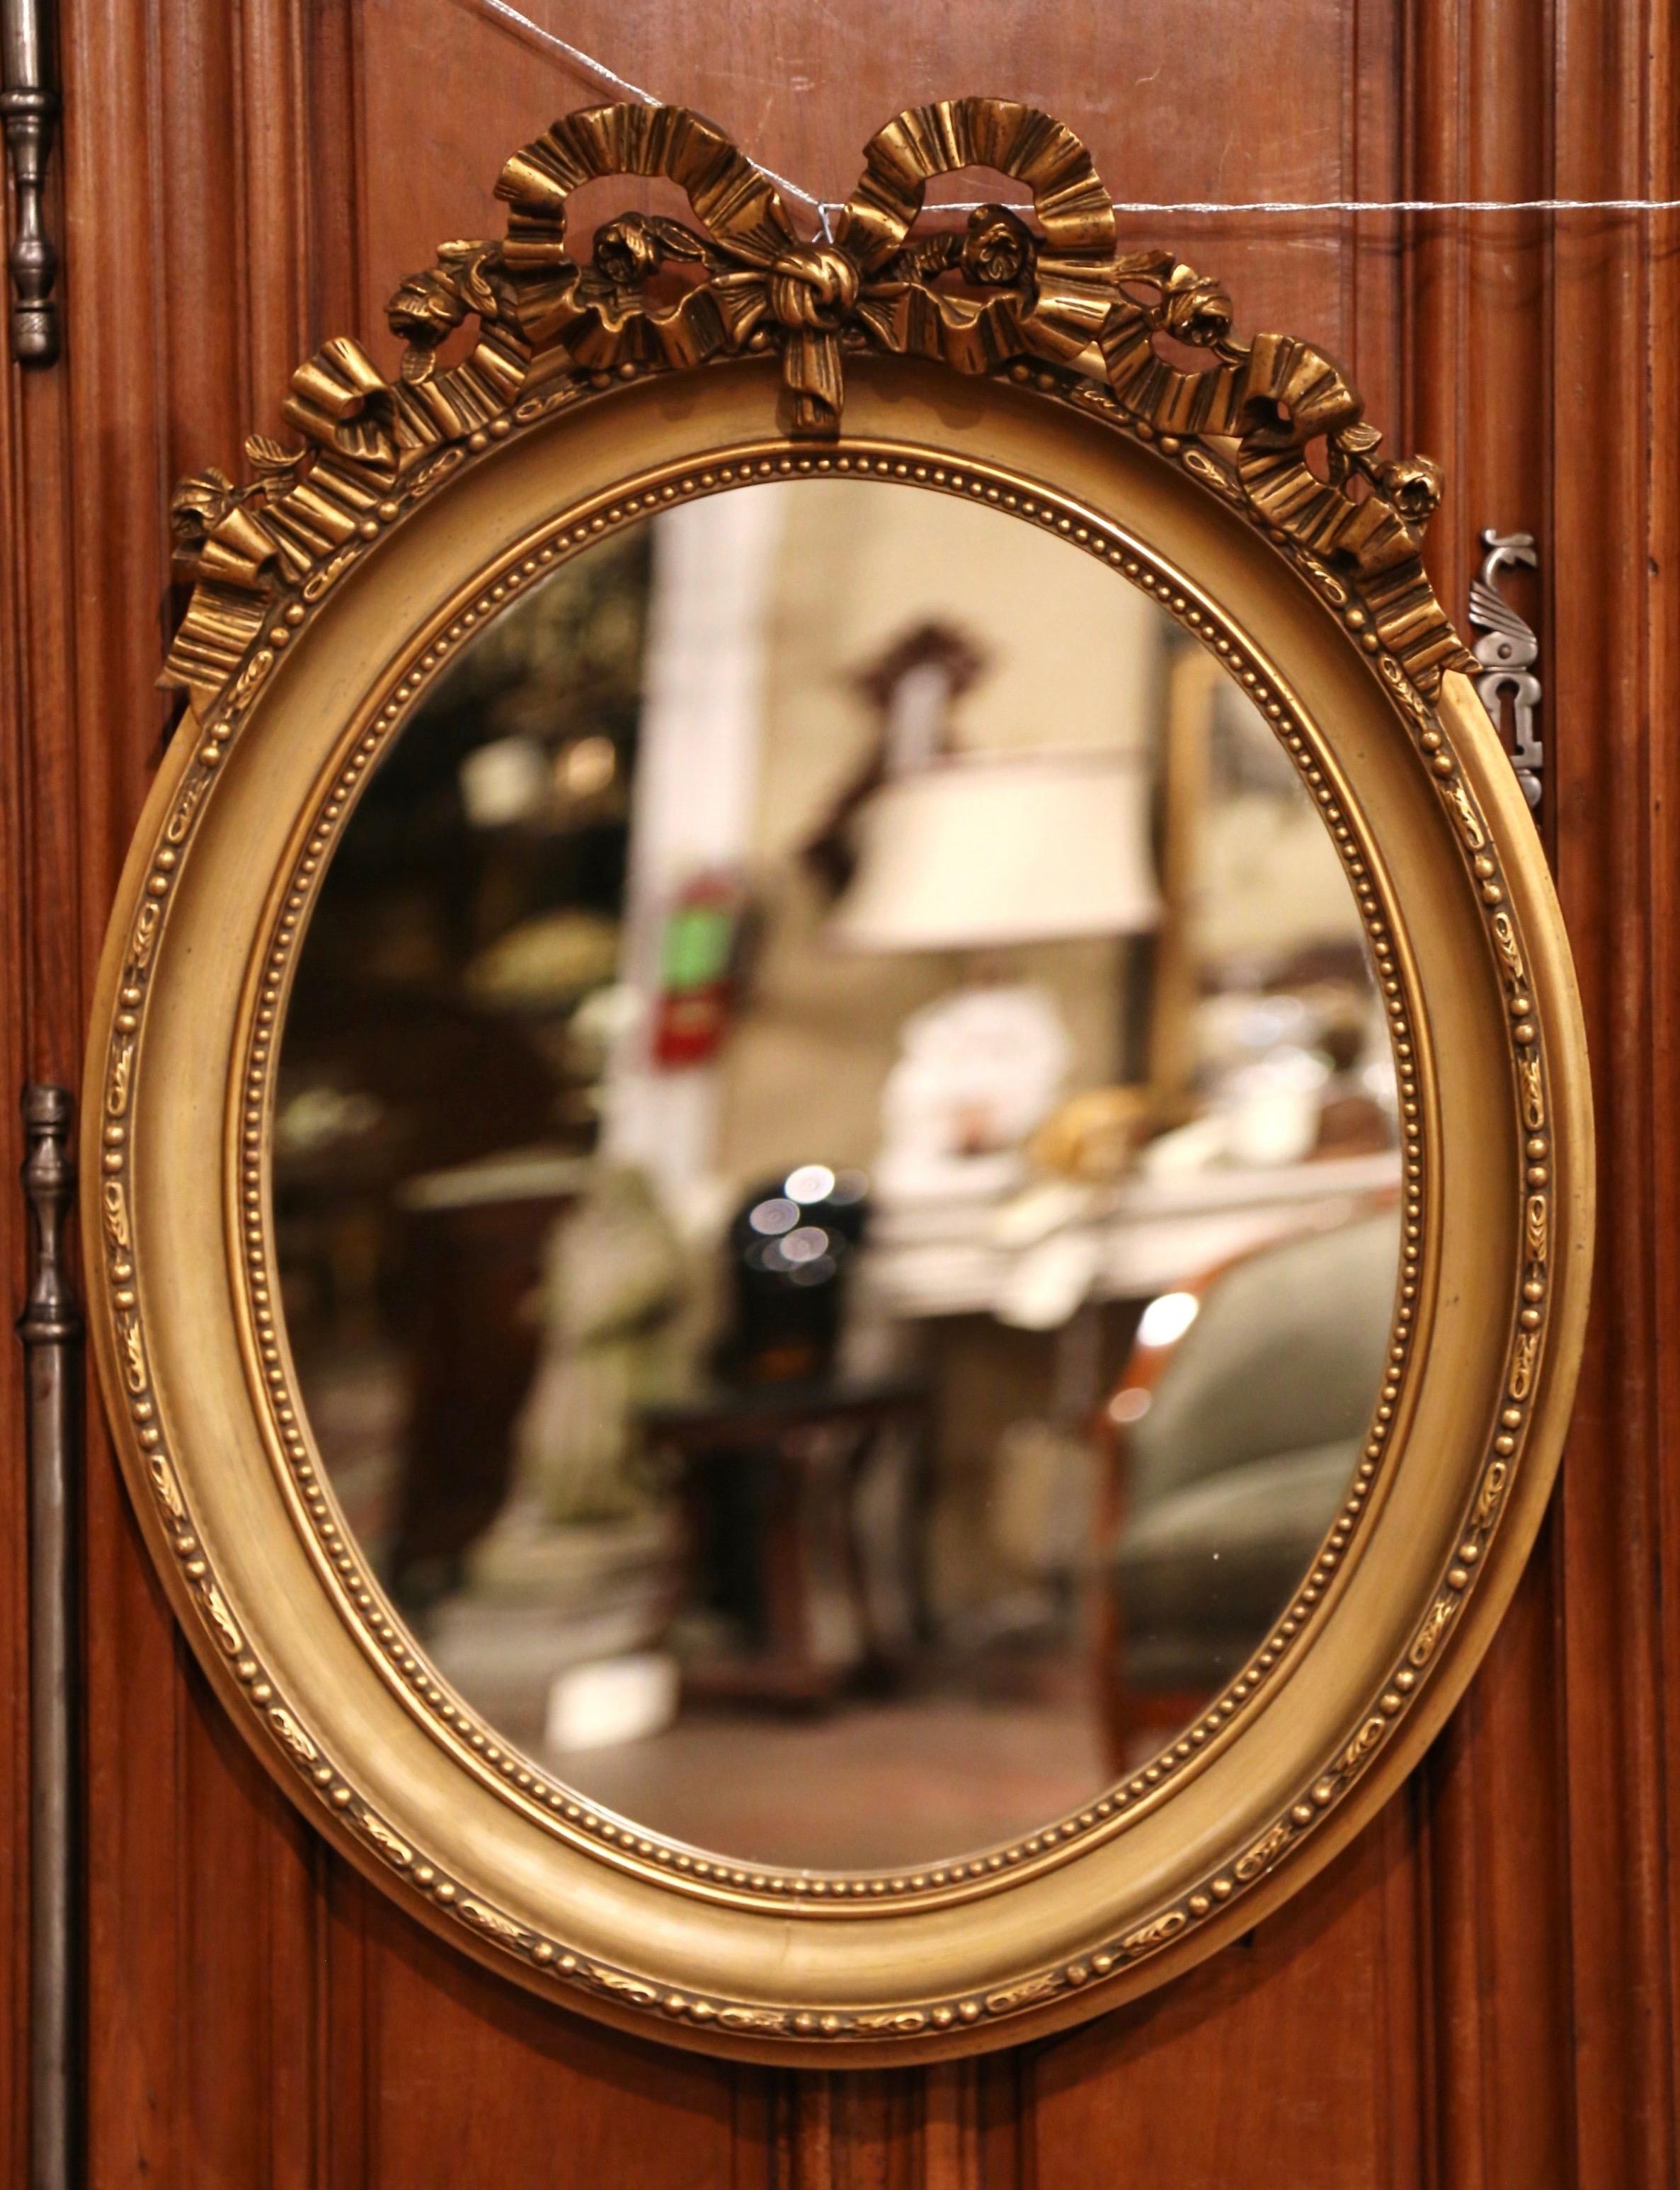 These elegant antique mirrors were crafted in France, circa 1880. Each wall mirror features a traditional carved Louis XVI ribbon bow at the pediment embellished with floral motifs, and the oval frame is decorated with rows of beads around the